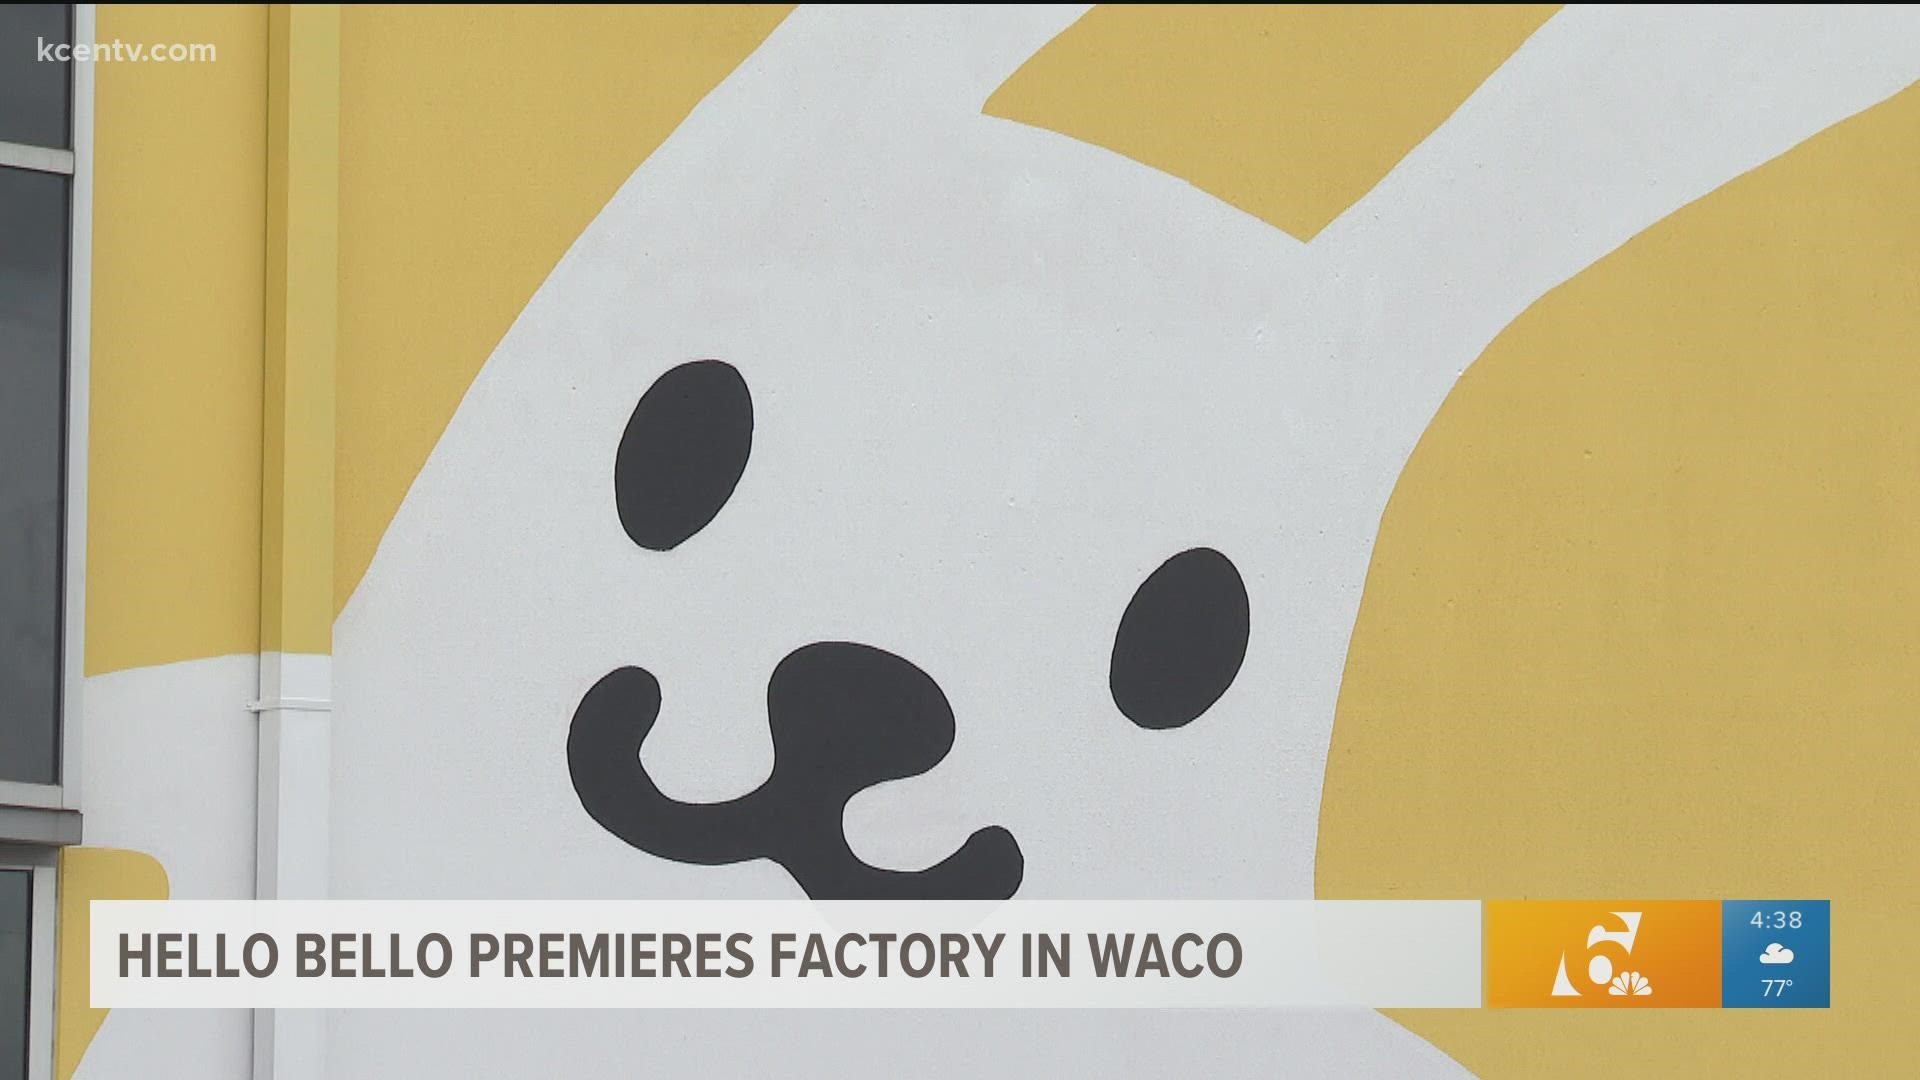 Waco's first independent U.S. diaper company, Hello Bello celebrates its Grand Opening. KCEN's Matt Lively with more.